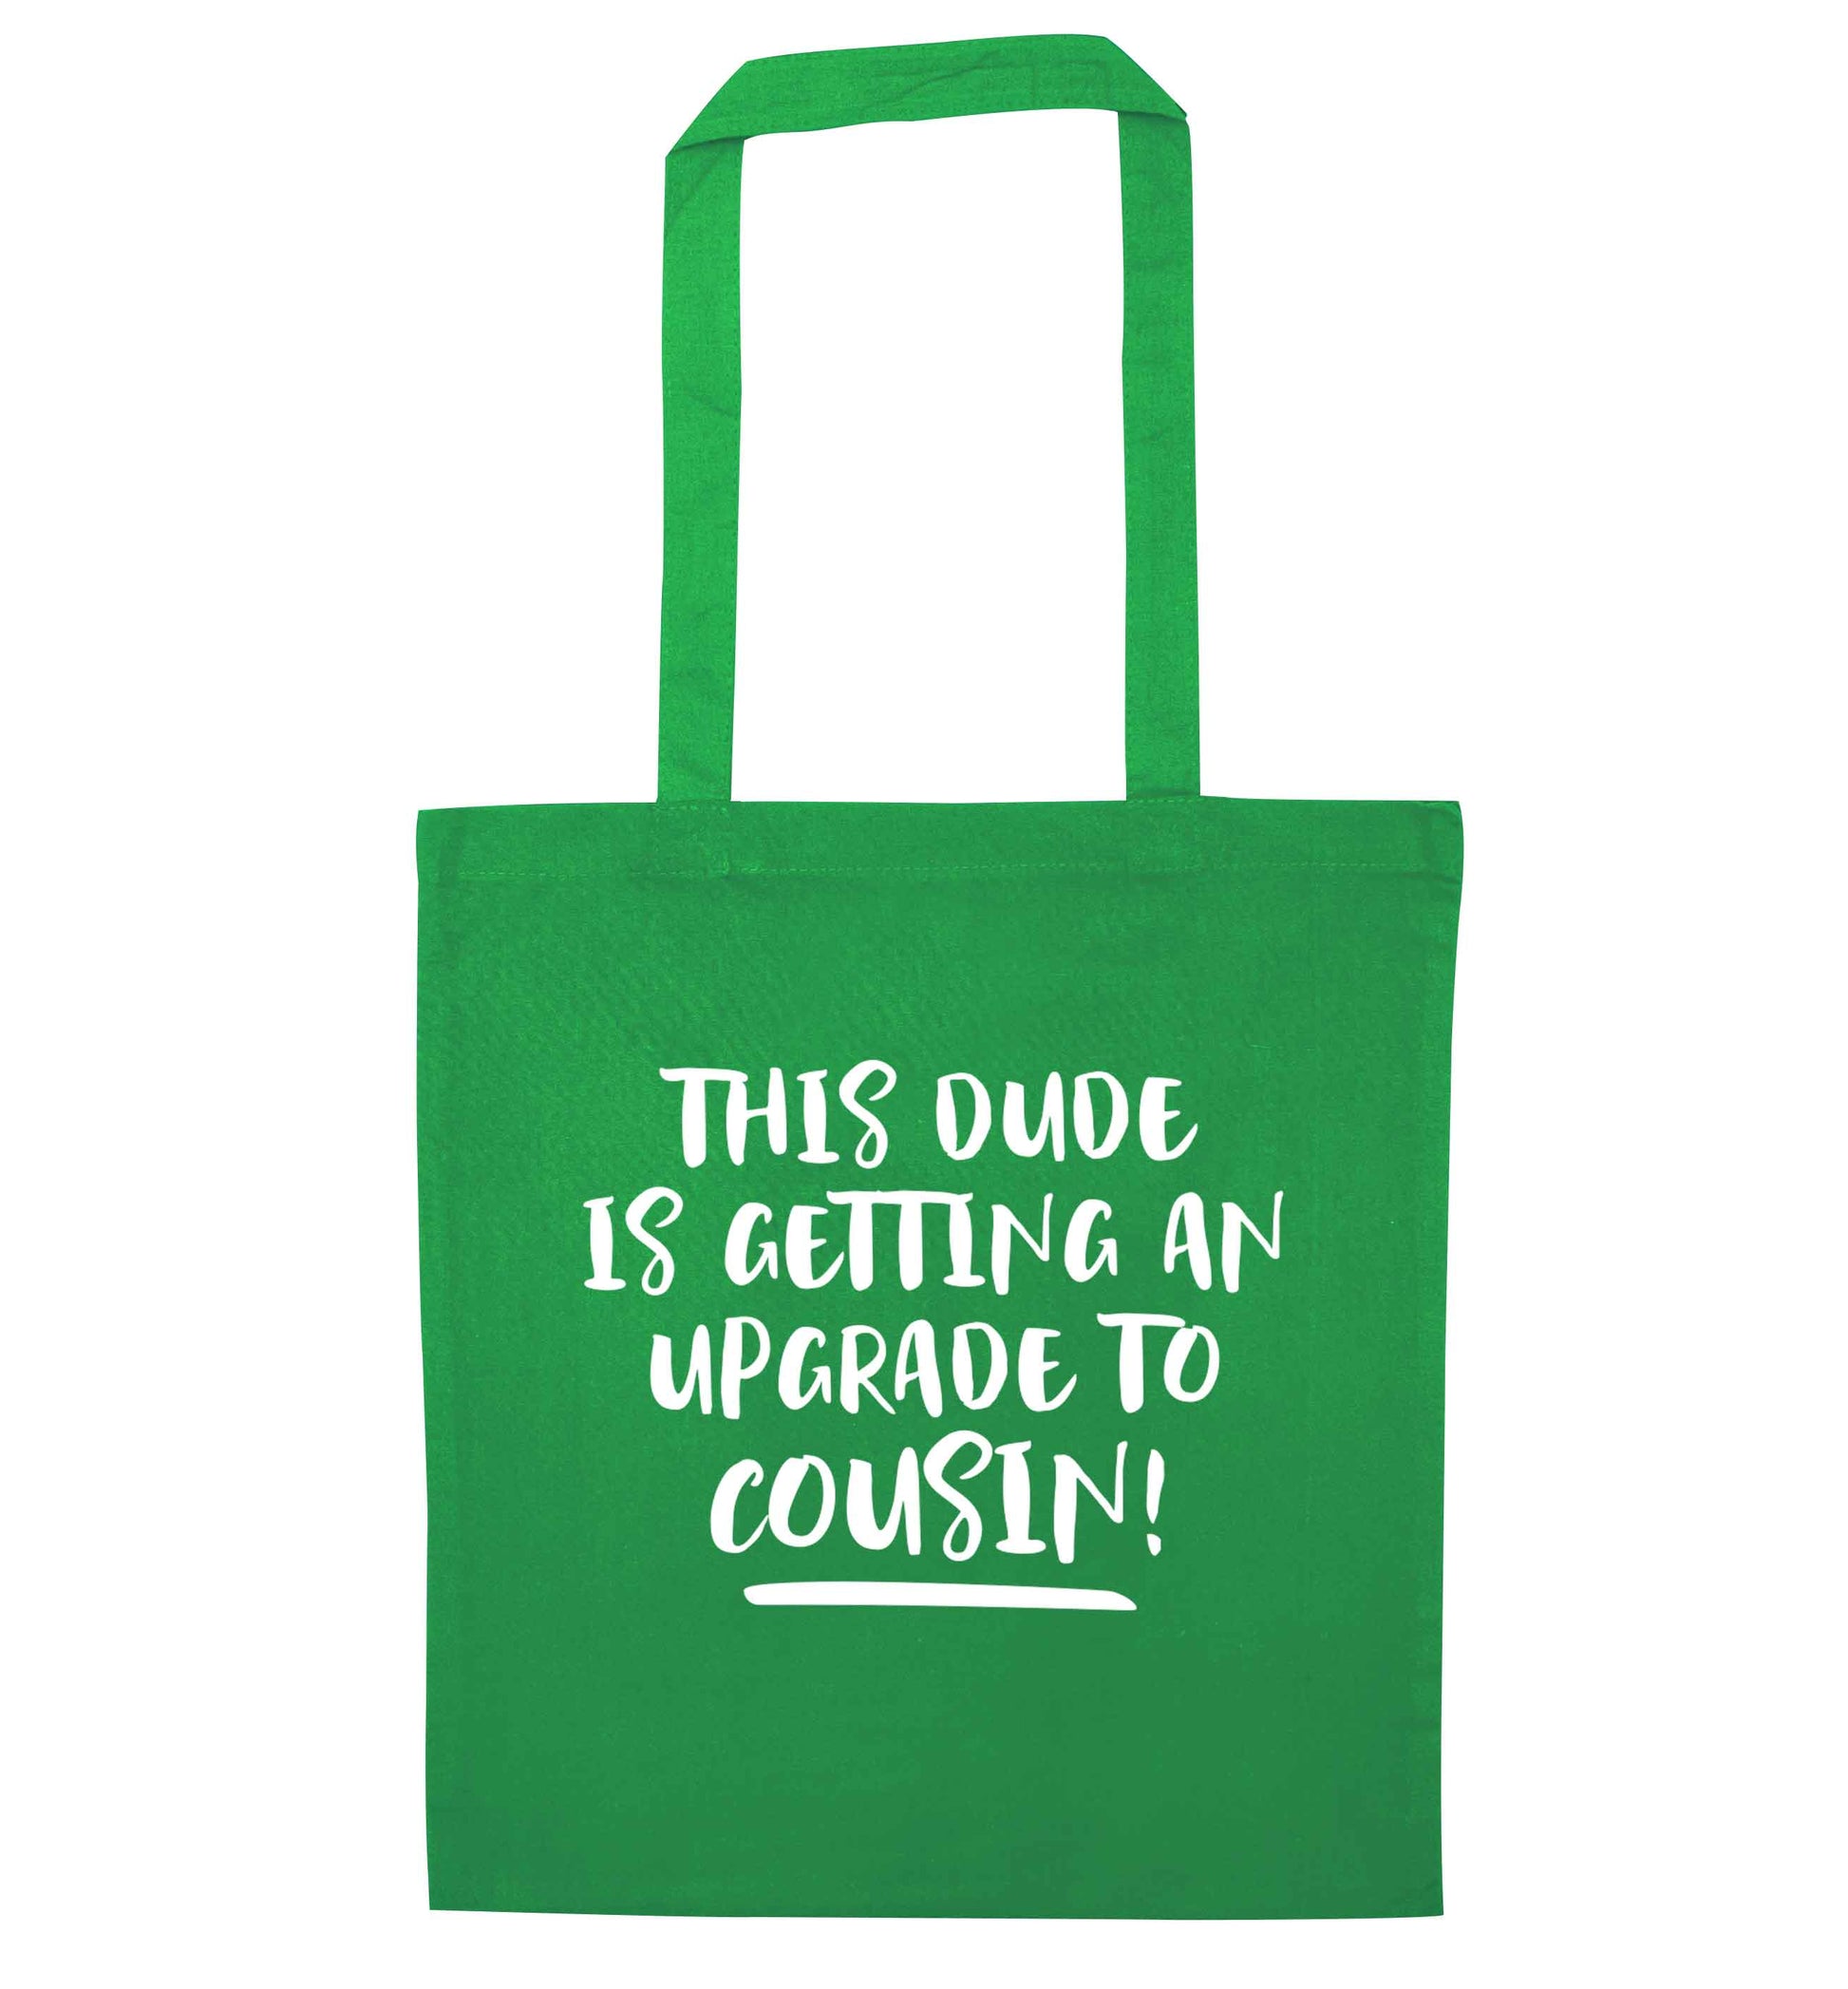 This dude is getting an upgrade to cousin! green tote bag